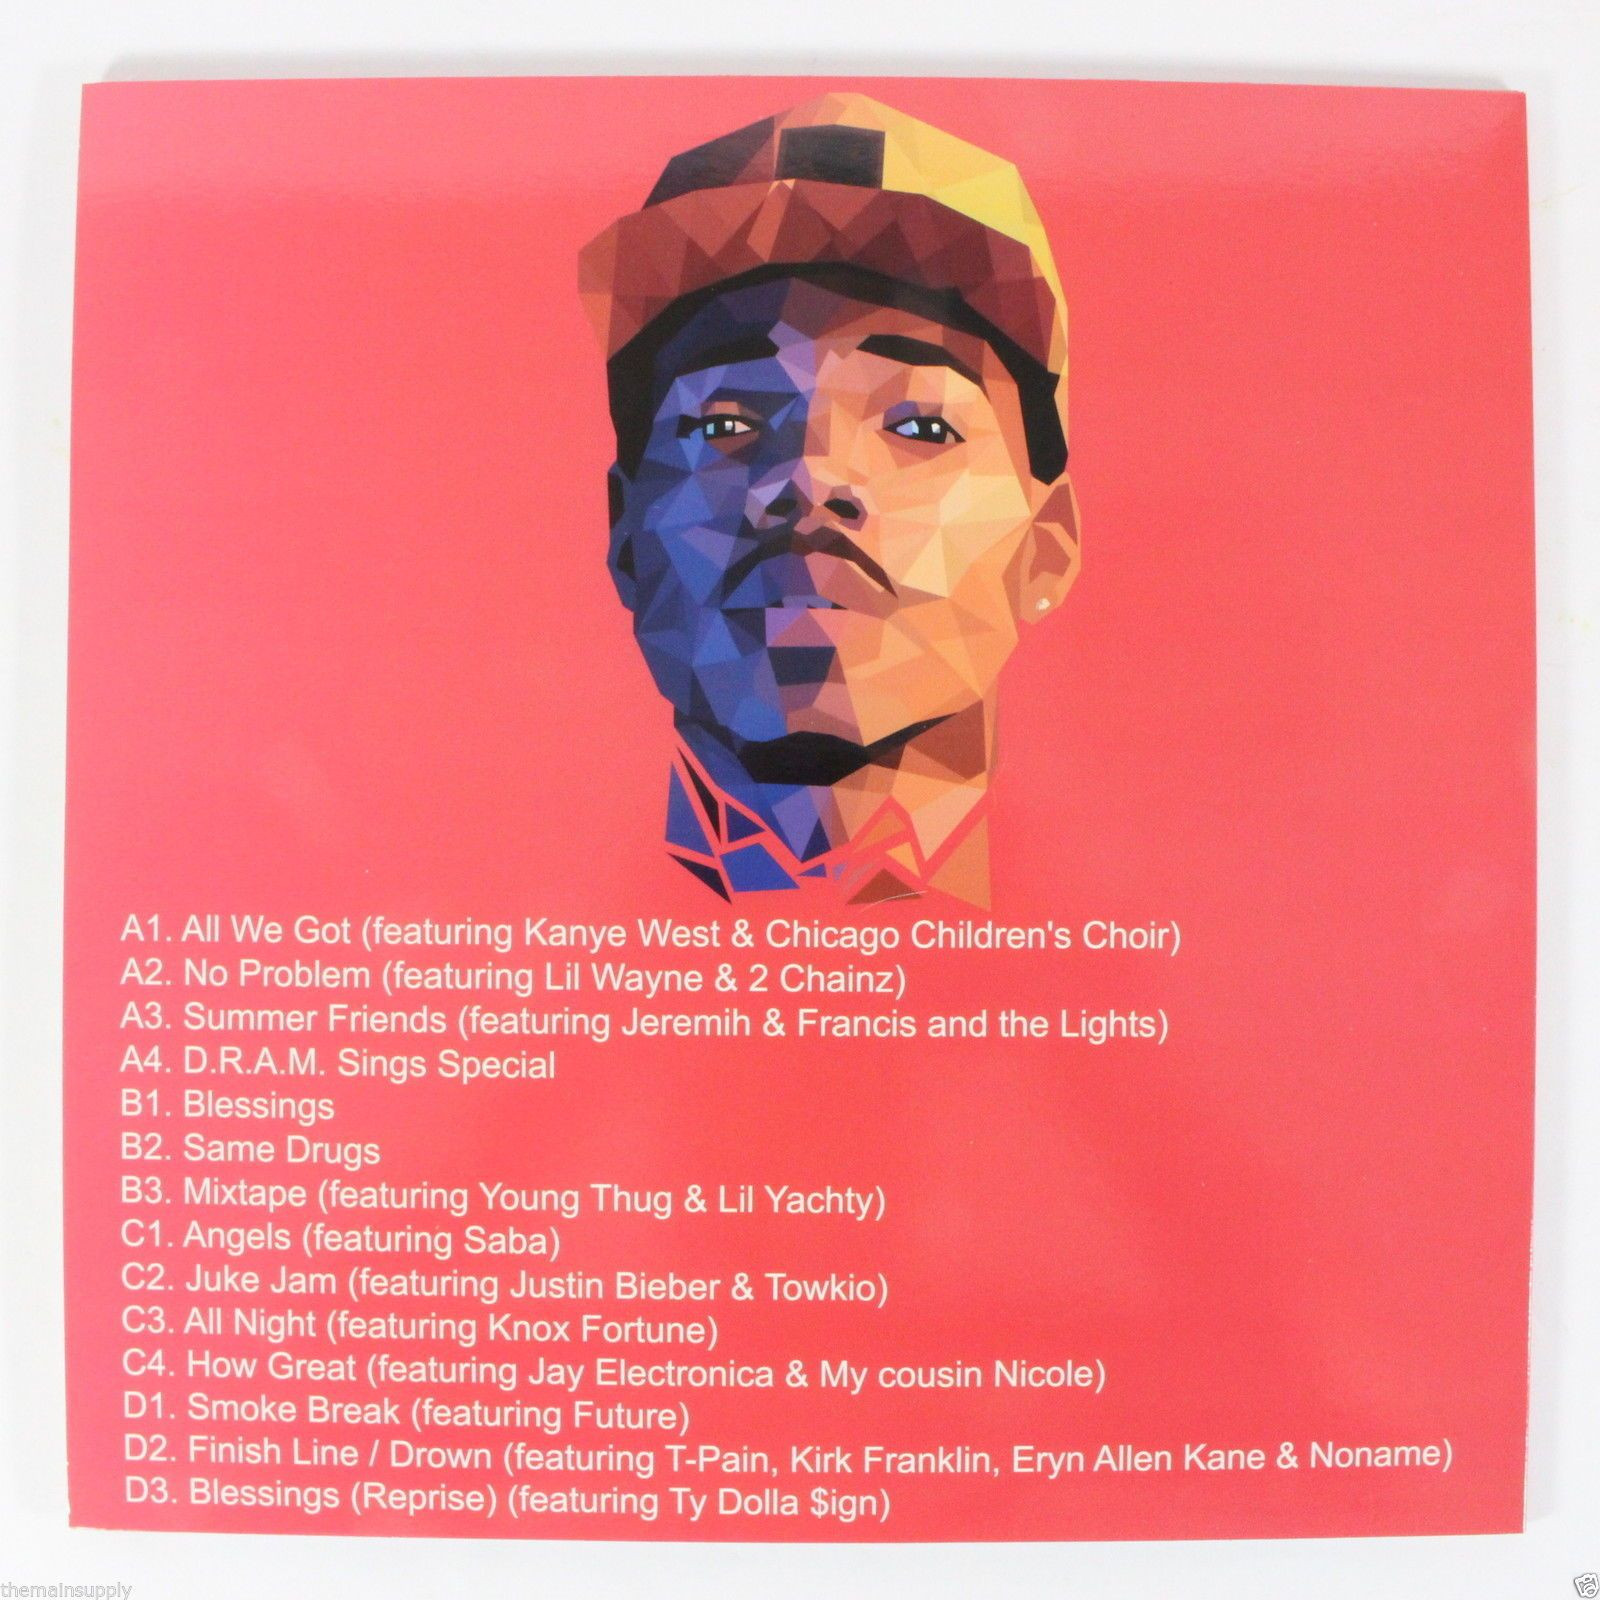 Coloring Book Chance The Rapper Vinyl
 Chance the Rapper Coloring book VINYL